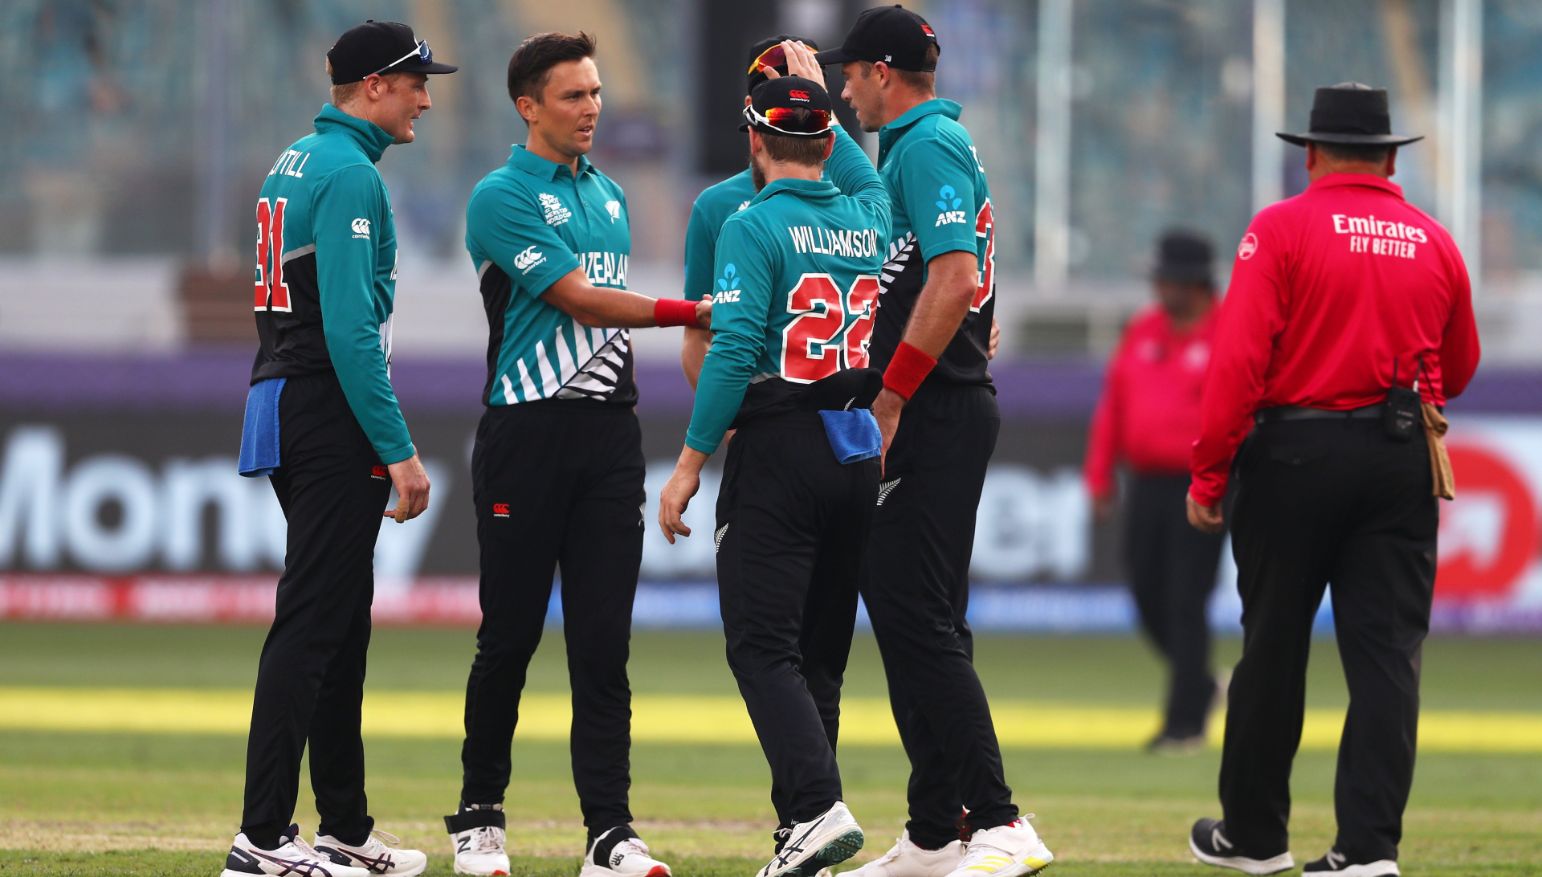 T20 World Cup | NZ vs NAM: In pursuit of net run rate boost, New Zealand face tricky Namibians in Sharjah